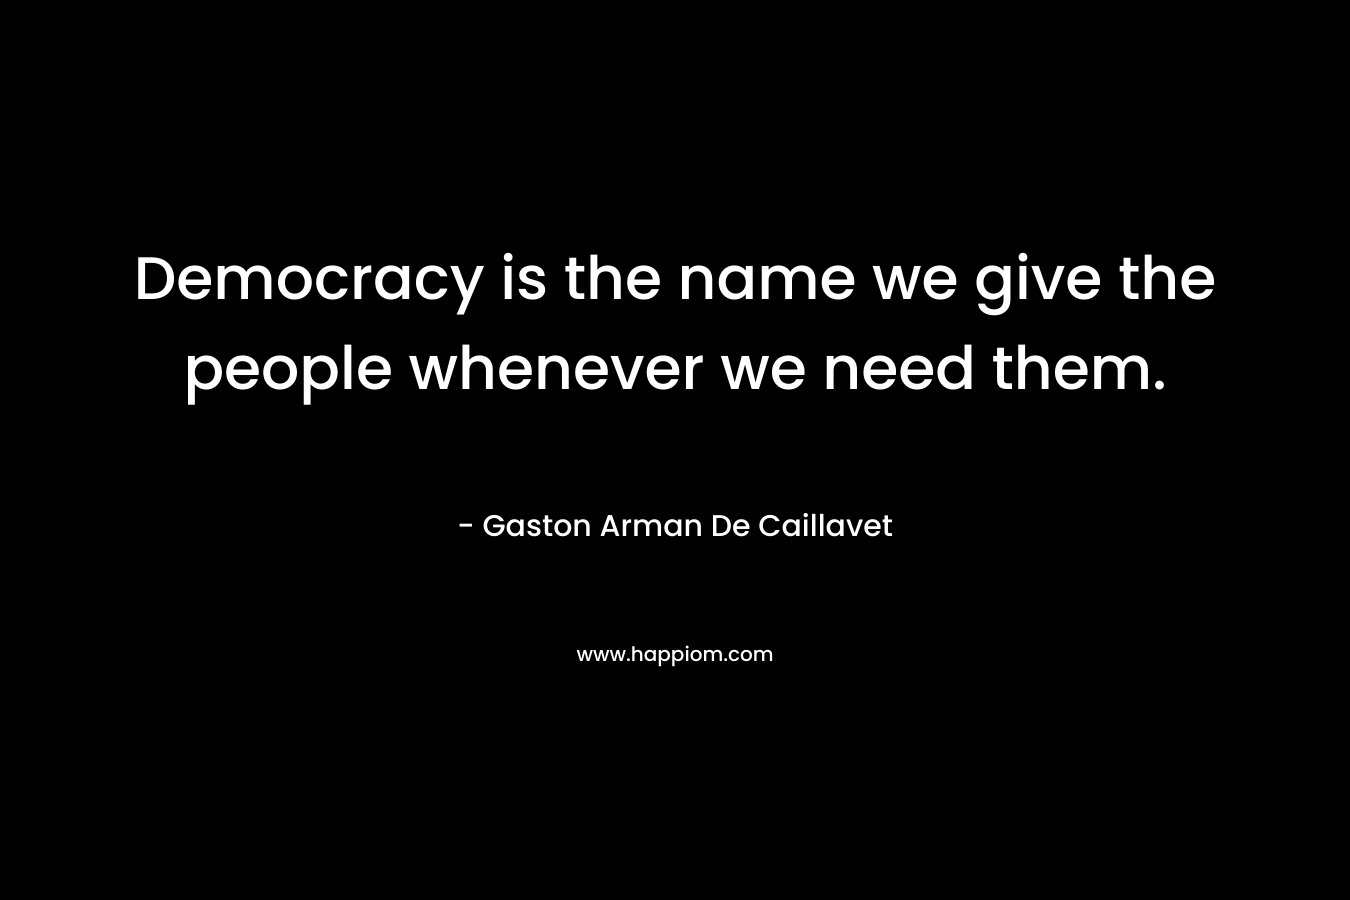 Democracy is the name we give the people whenever we need them. – Gaston Arman De Caillavet